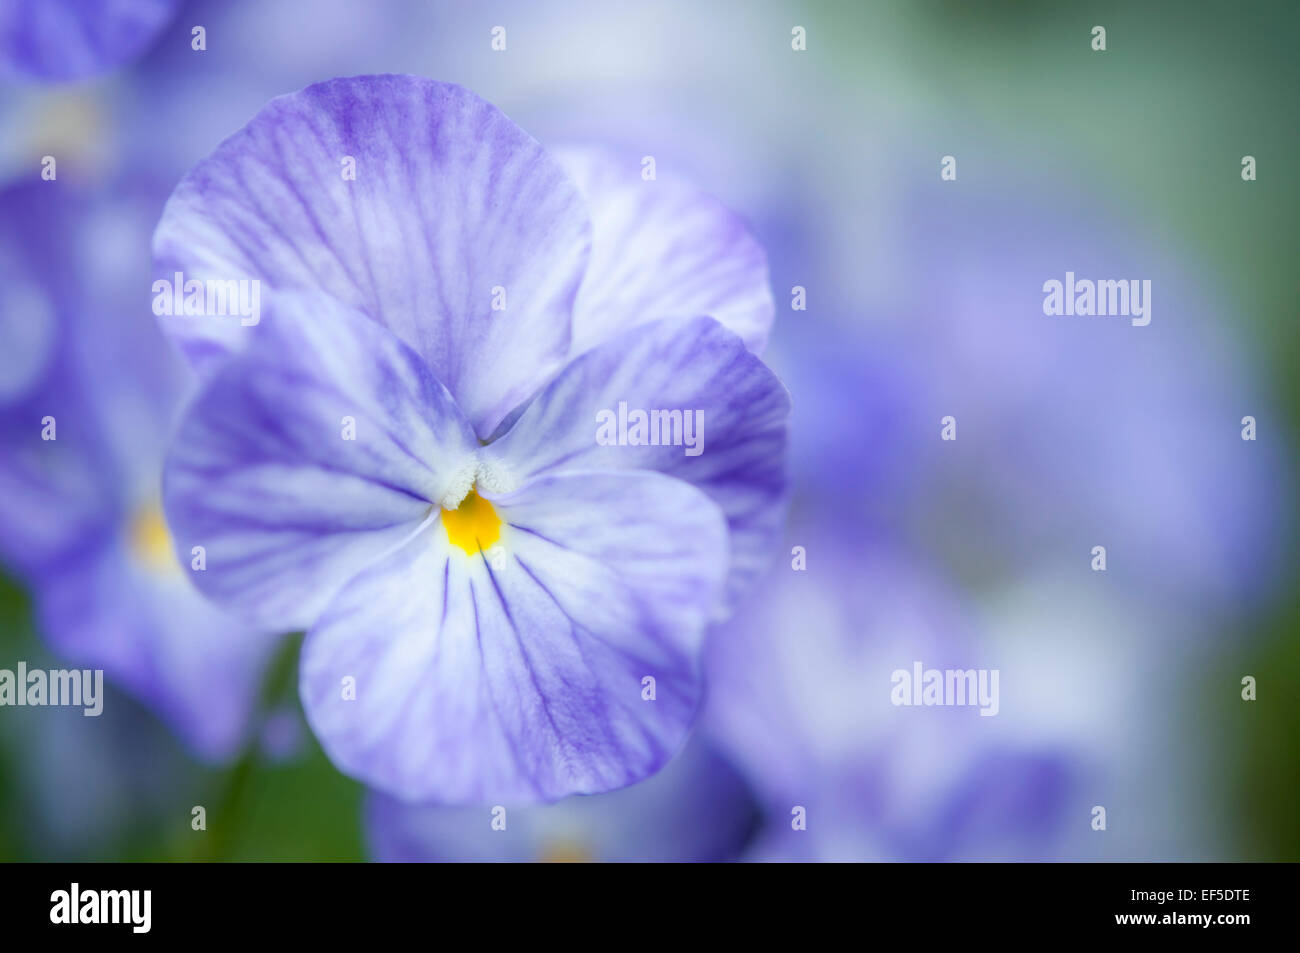 Pale blue veined Viola flower in close up with soft background. Stock Photo